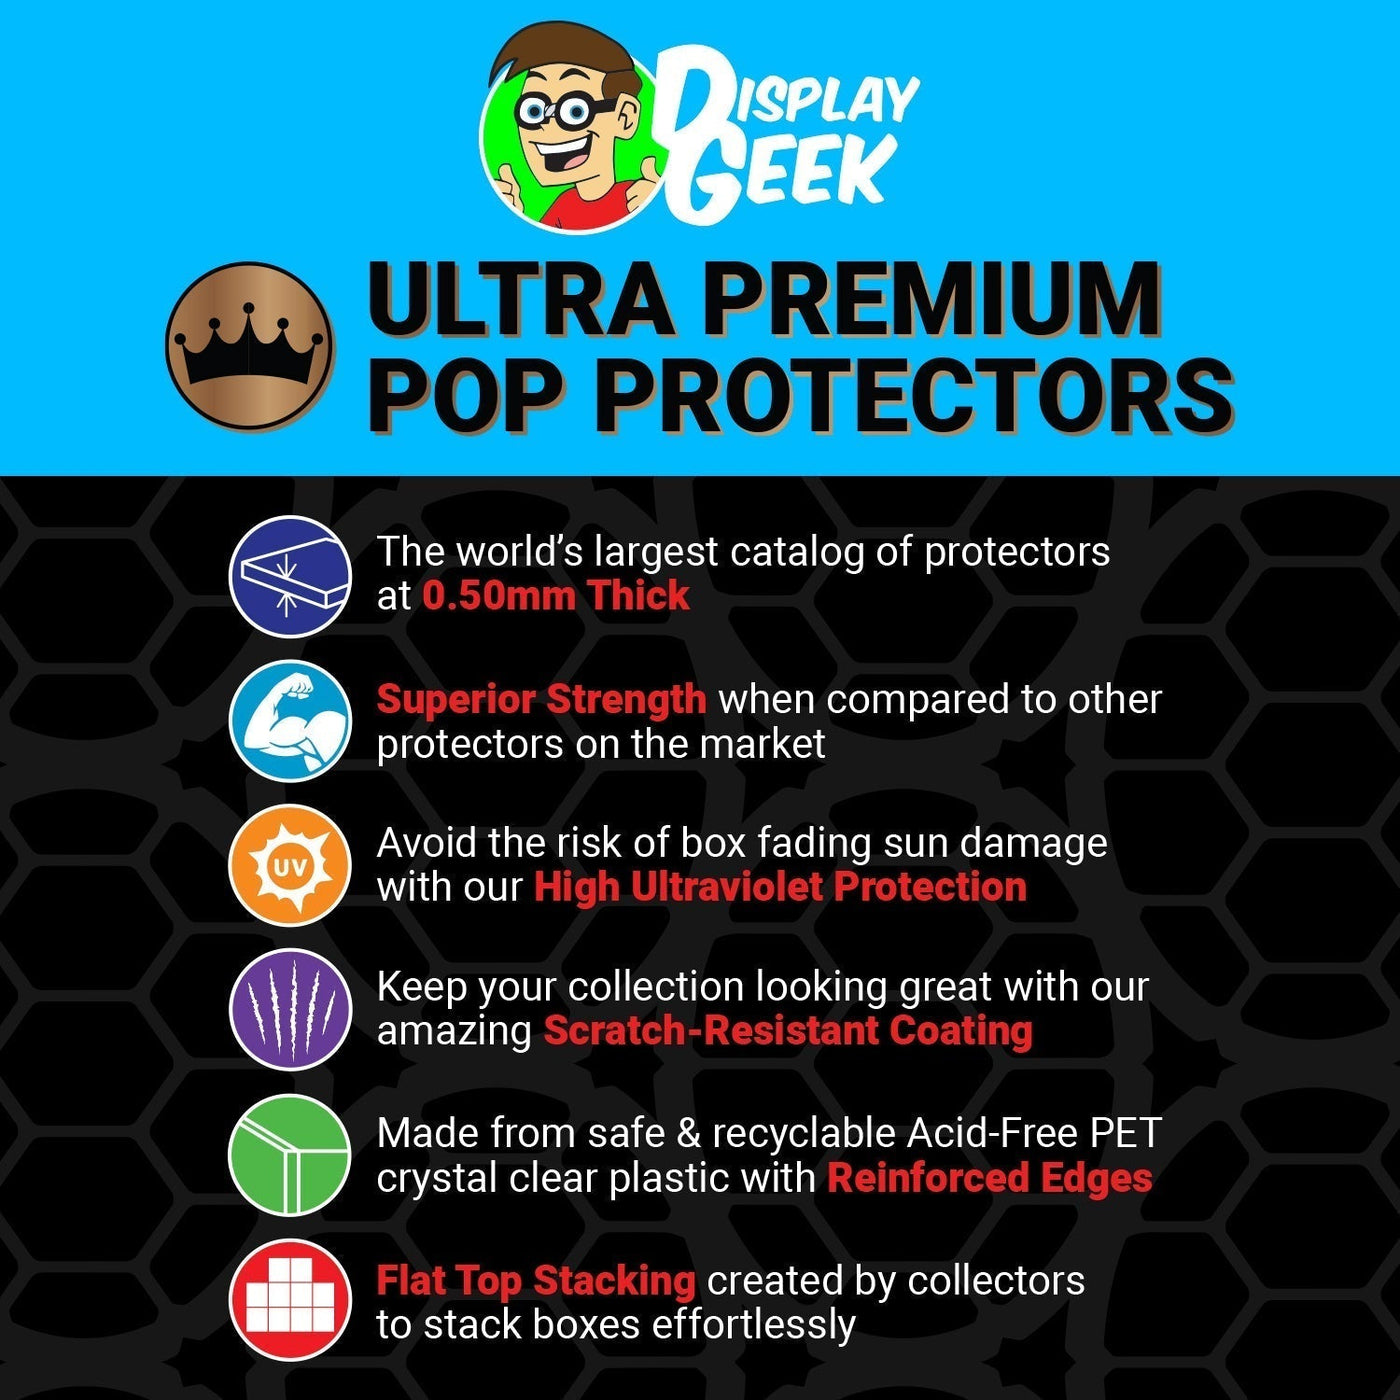 Pop Protector for 6 inch Mr. Snuffleupagus #05 Super Funko Pop on The Protector Guide App by Display Geek